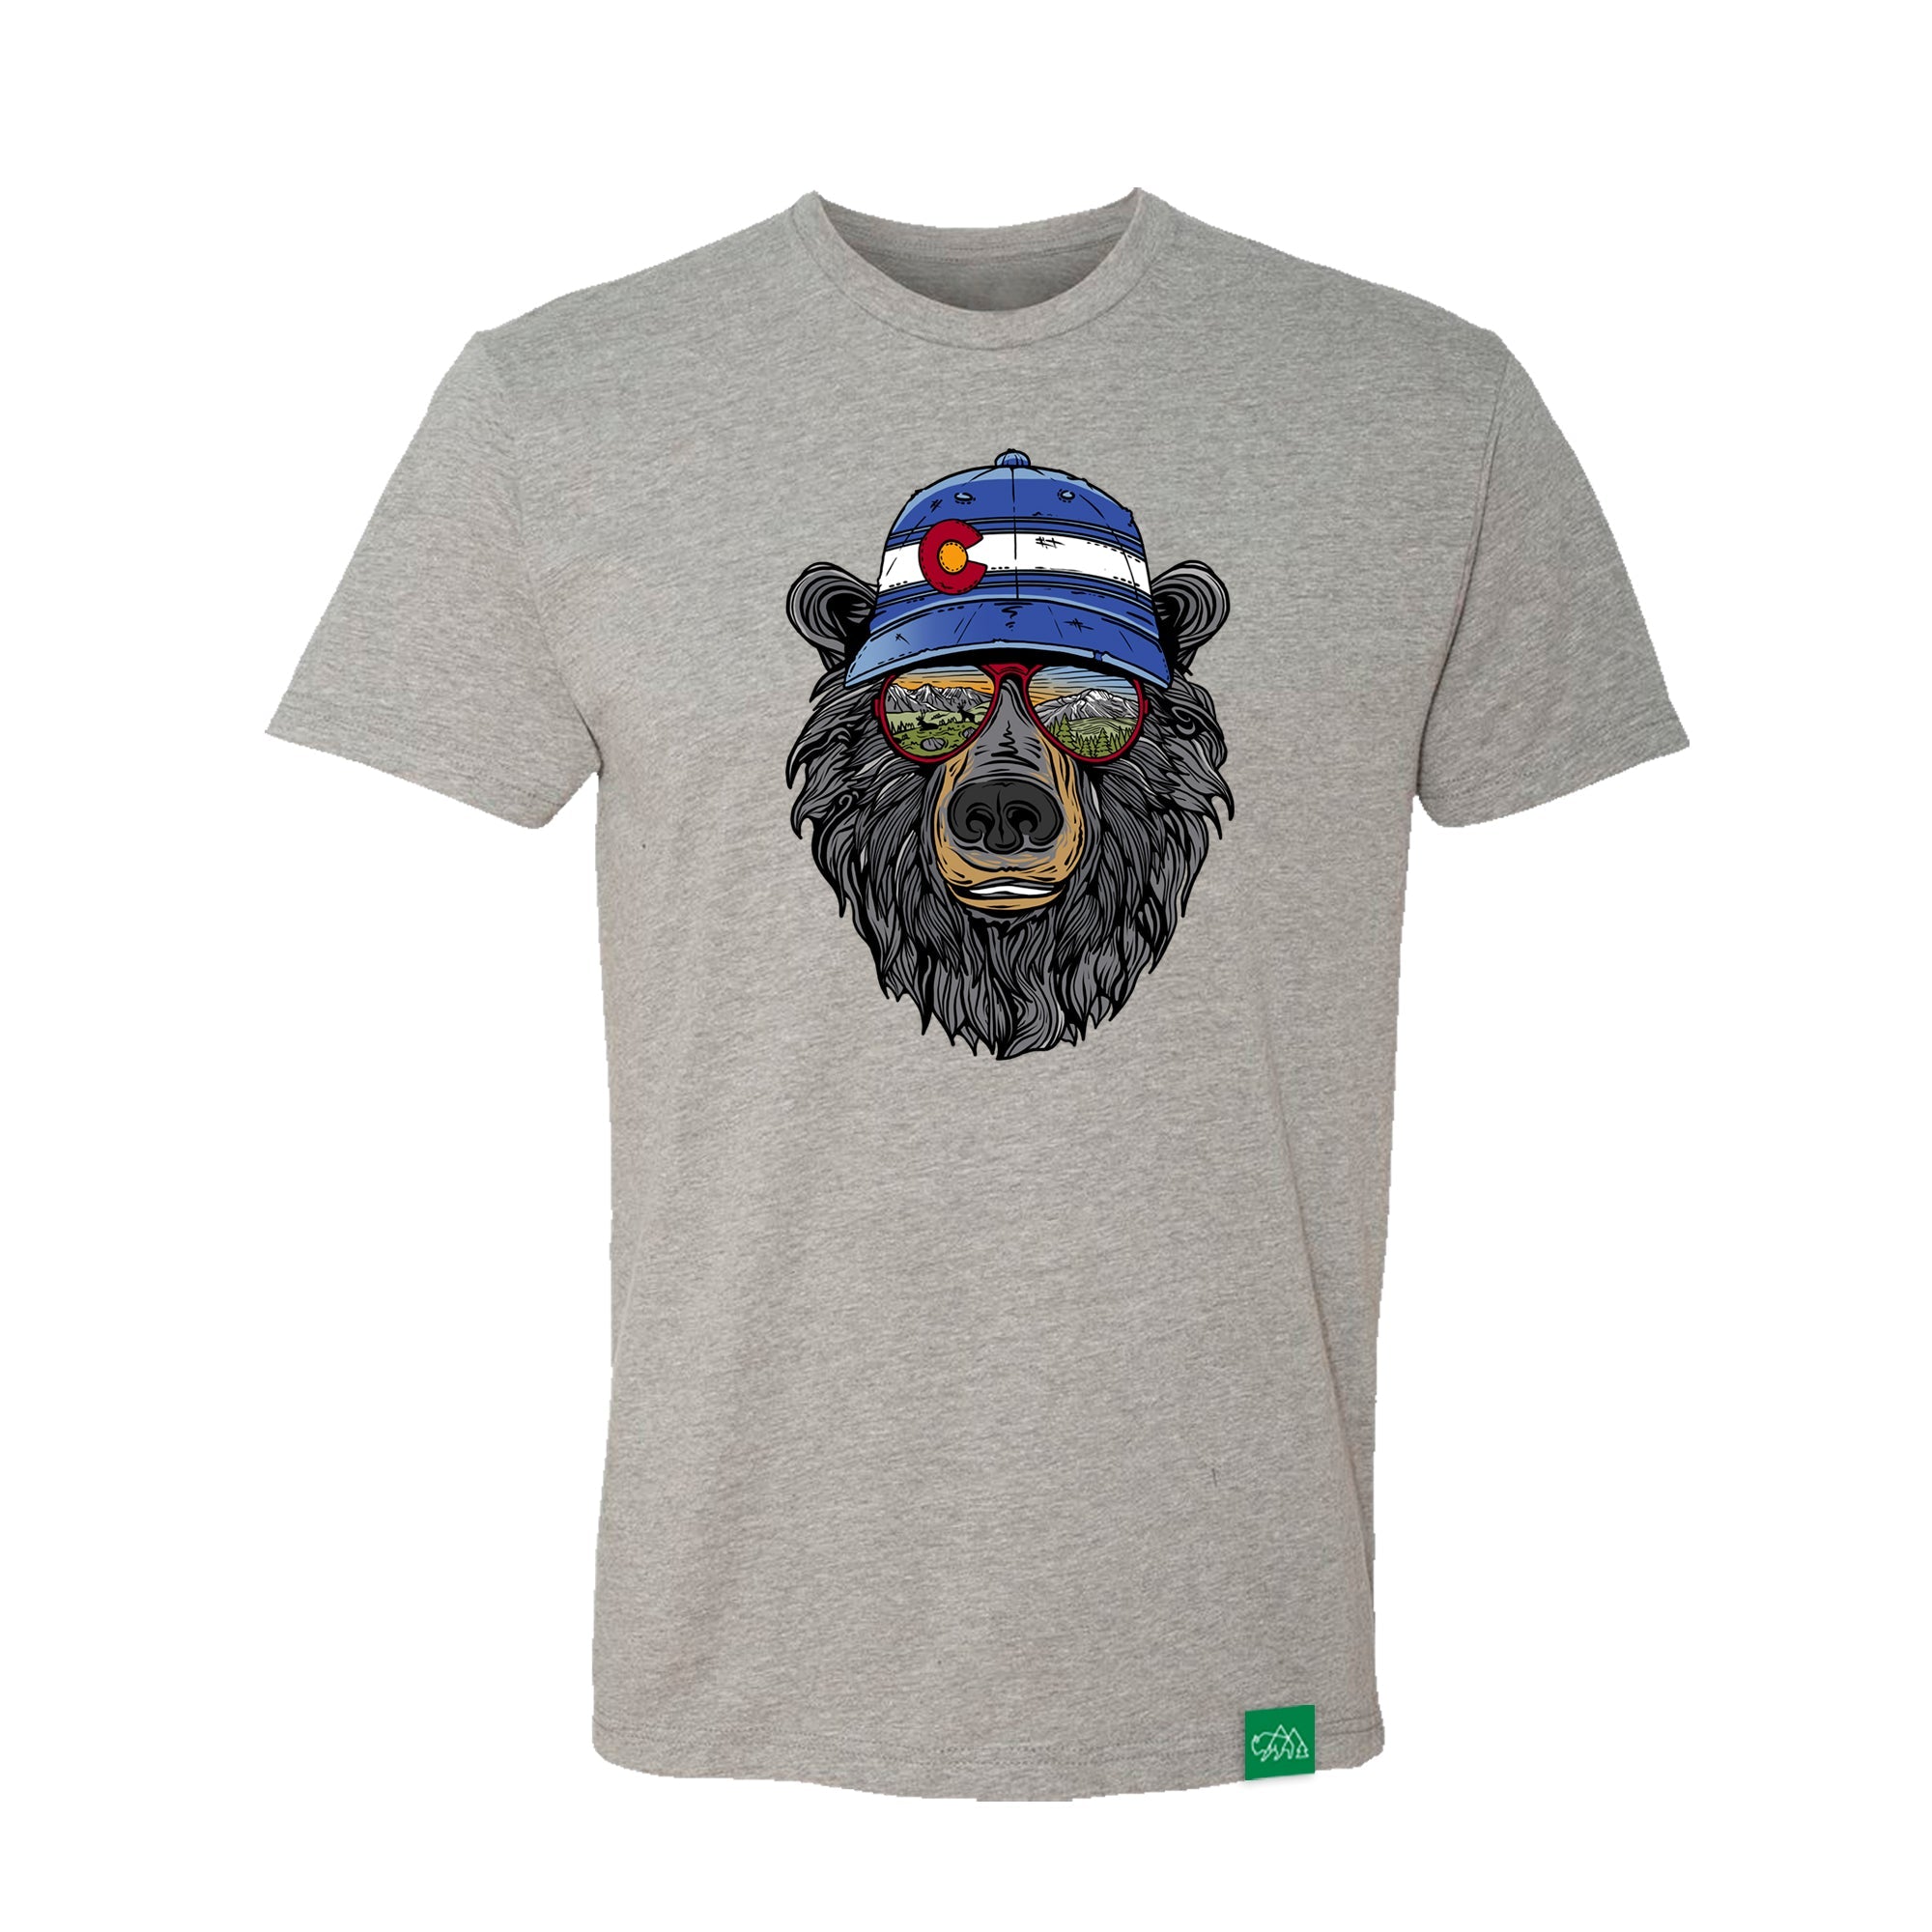 Rocky Mountains T Shirt National Park Vintage Tee Cool Bear